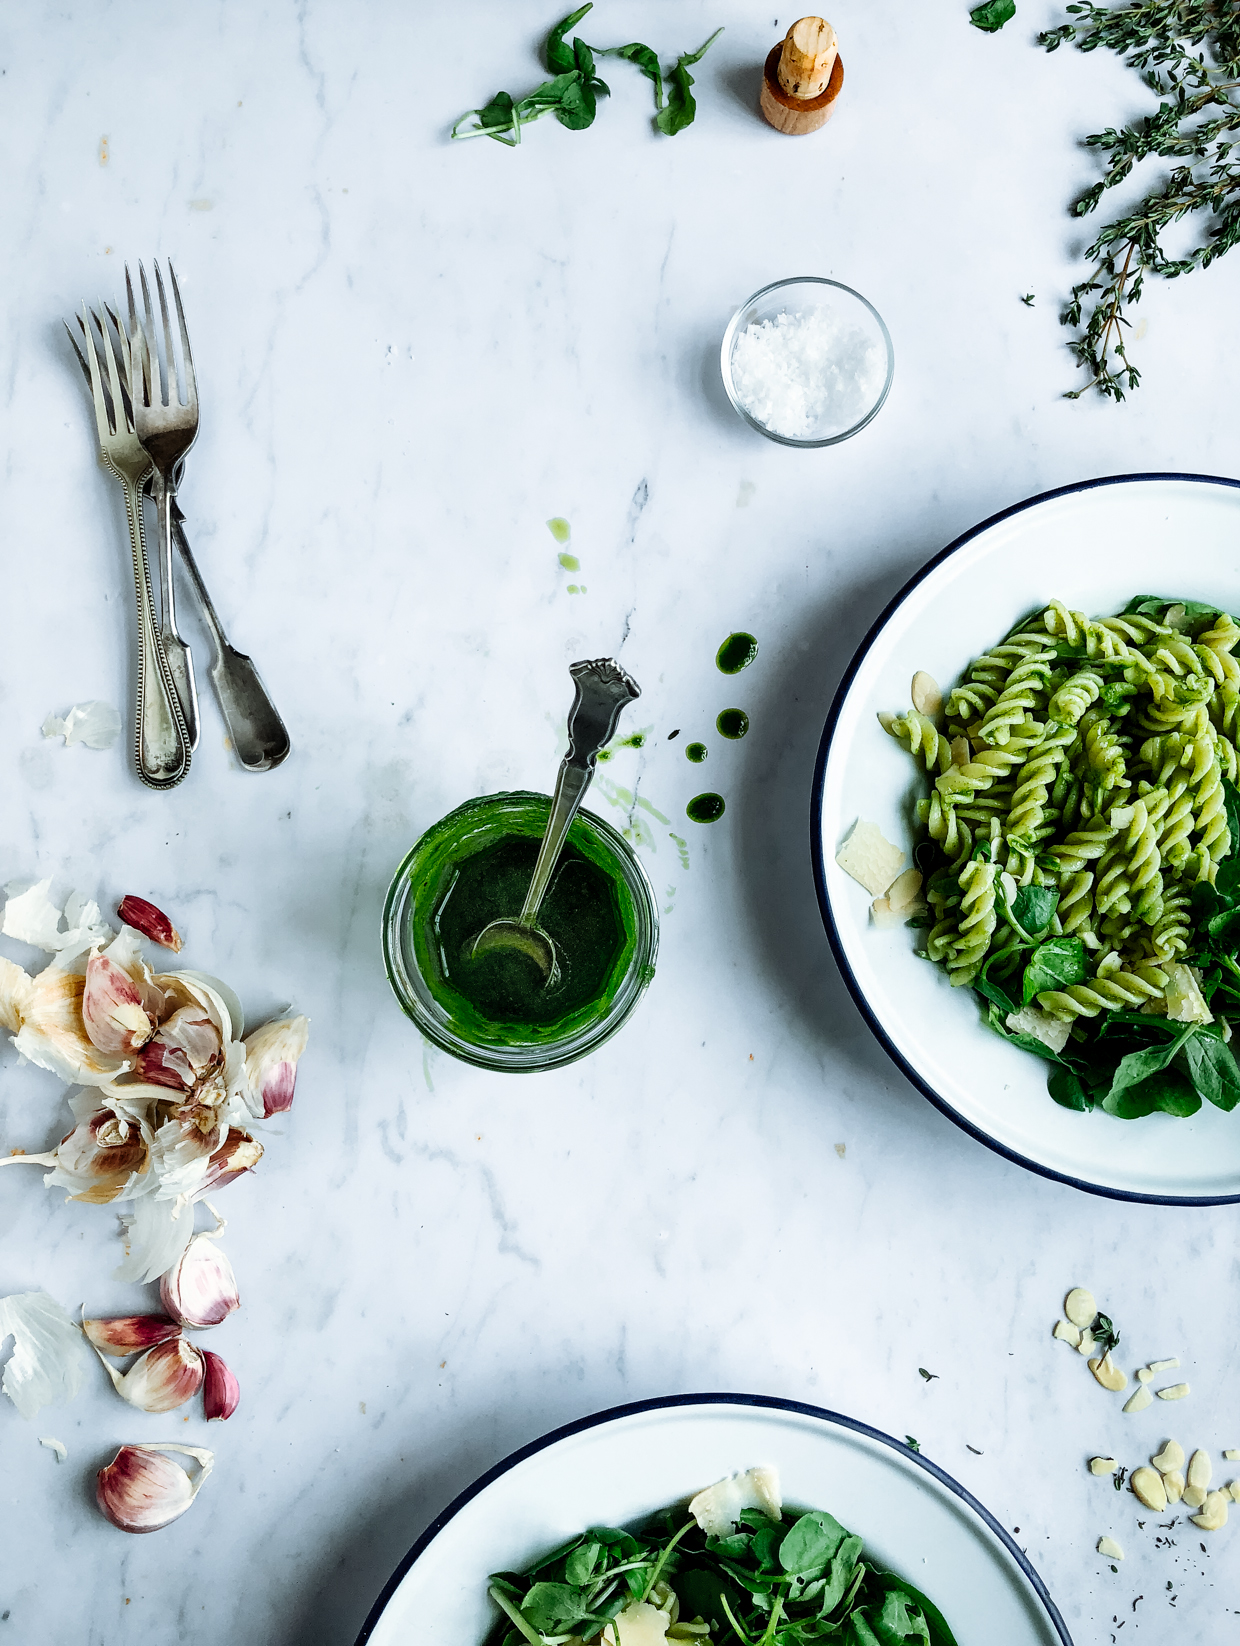 Green pasta salad with parsley & thyme vinaigrette